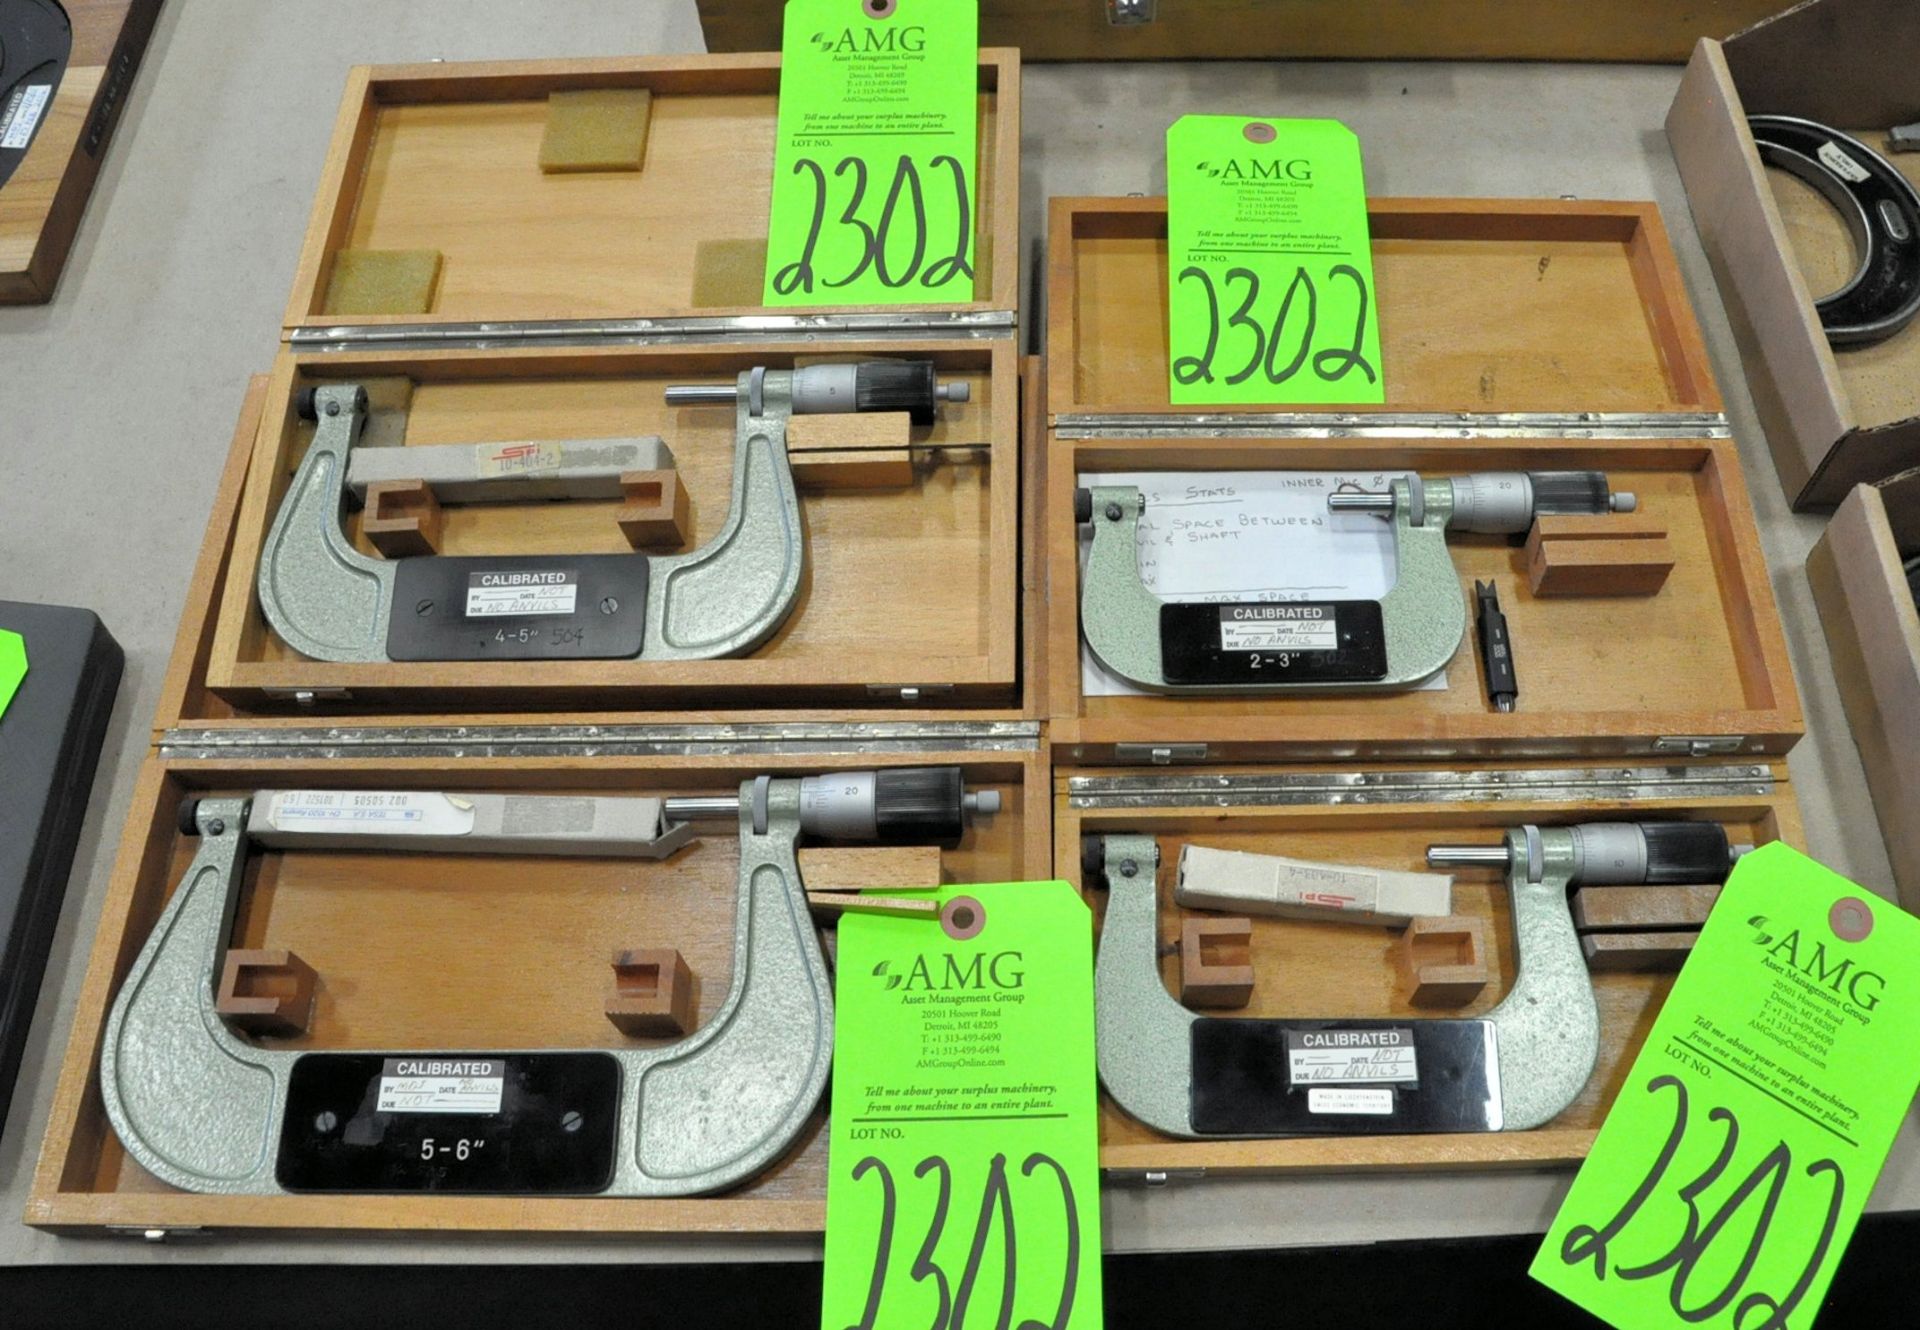 Lot-(1) 2-3", (1) 3-4", (1) 4-5", (1) 4-5" and (1) 5-6" Micrometers with Cases, (Tool Room), (Green